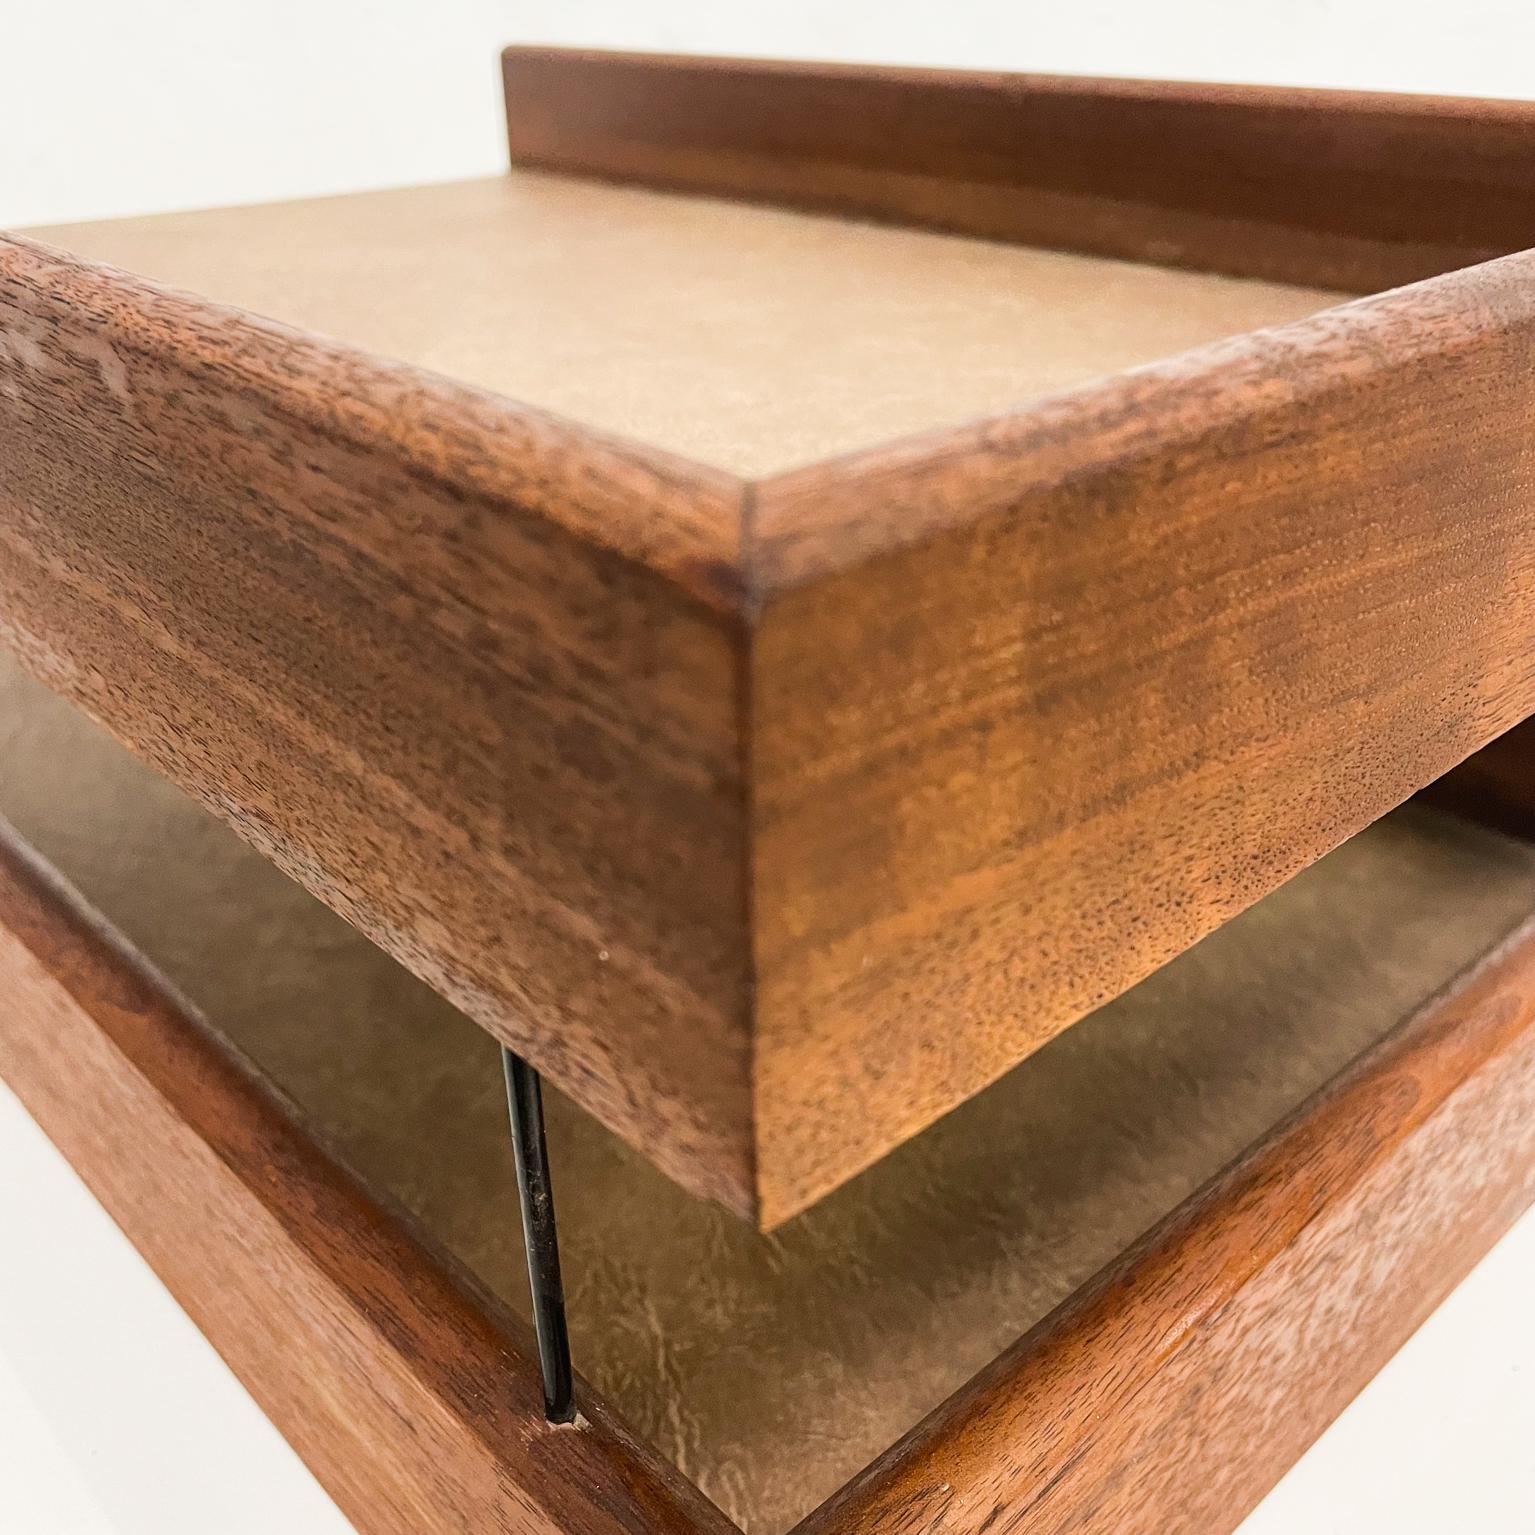 1970s Modern Two Tier Paper Tray Solid Walnut Wood and Bronze Desk Accessory 1